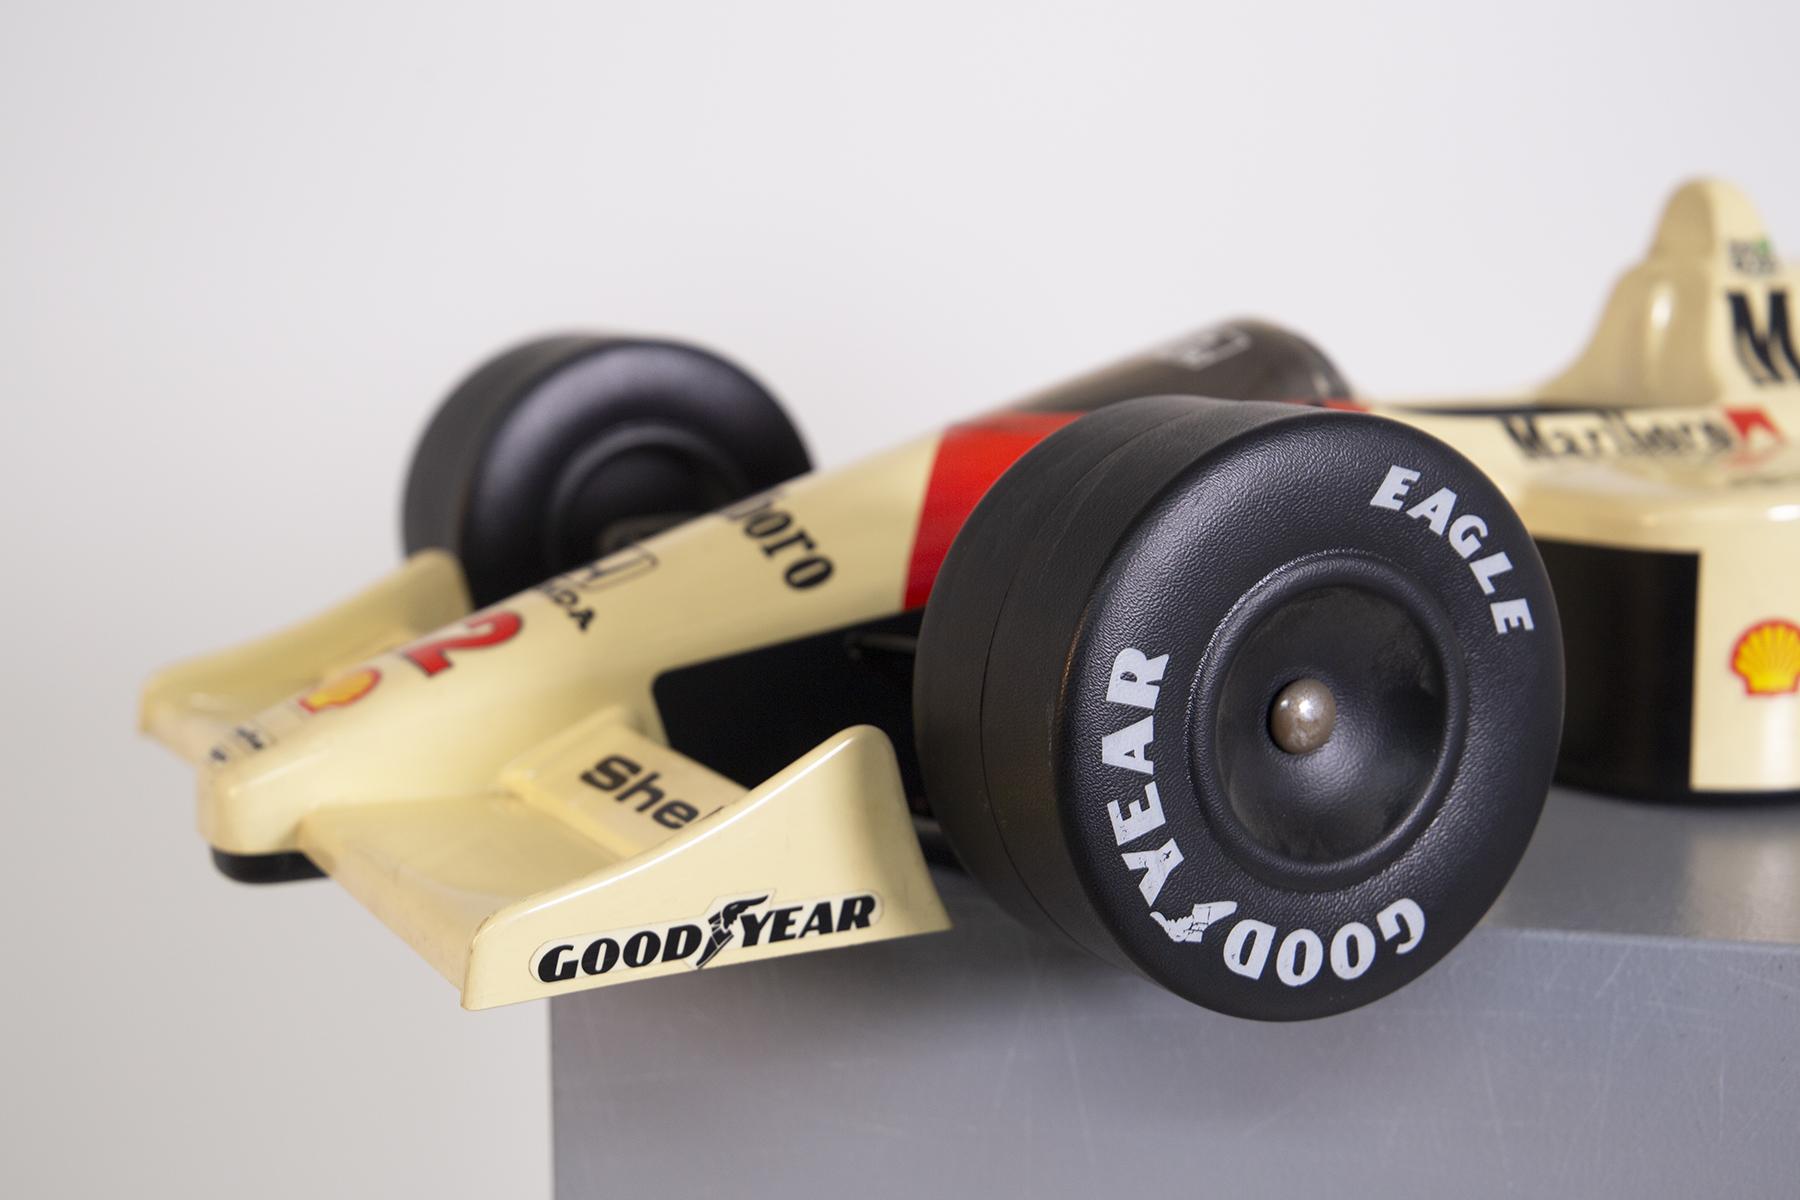 Rare McLaren racing car model in 1:8 scale. The model toy is the celebratory car for Ayrton Senna's 1988 world championship victory . The model is one of the rarest models because it is present the flag of Brazil. The model is Honda Mod. MP 4/4